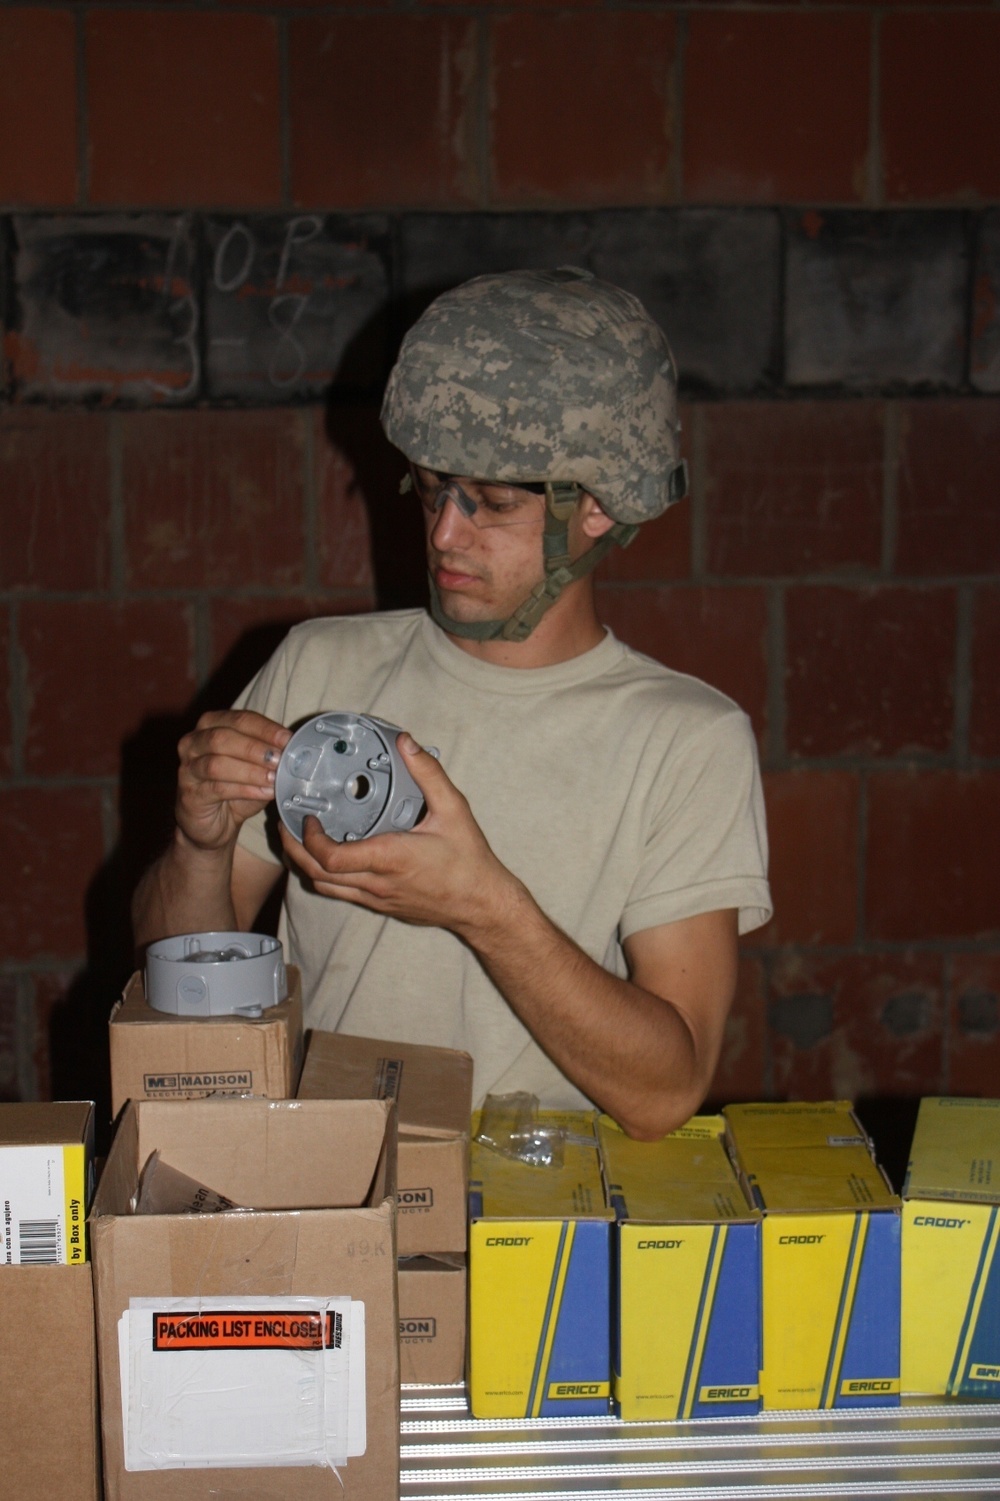 Wiring for the future: 1194th soldiers install electrical wiring in building at Camp Ravenna